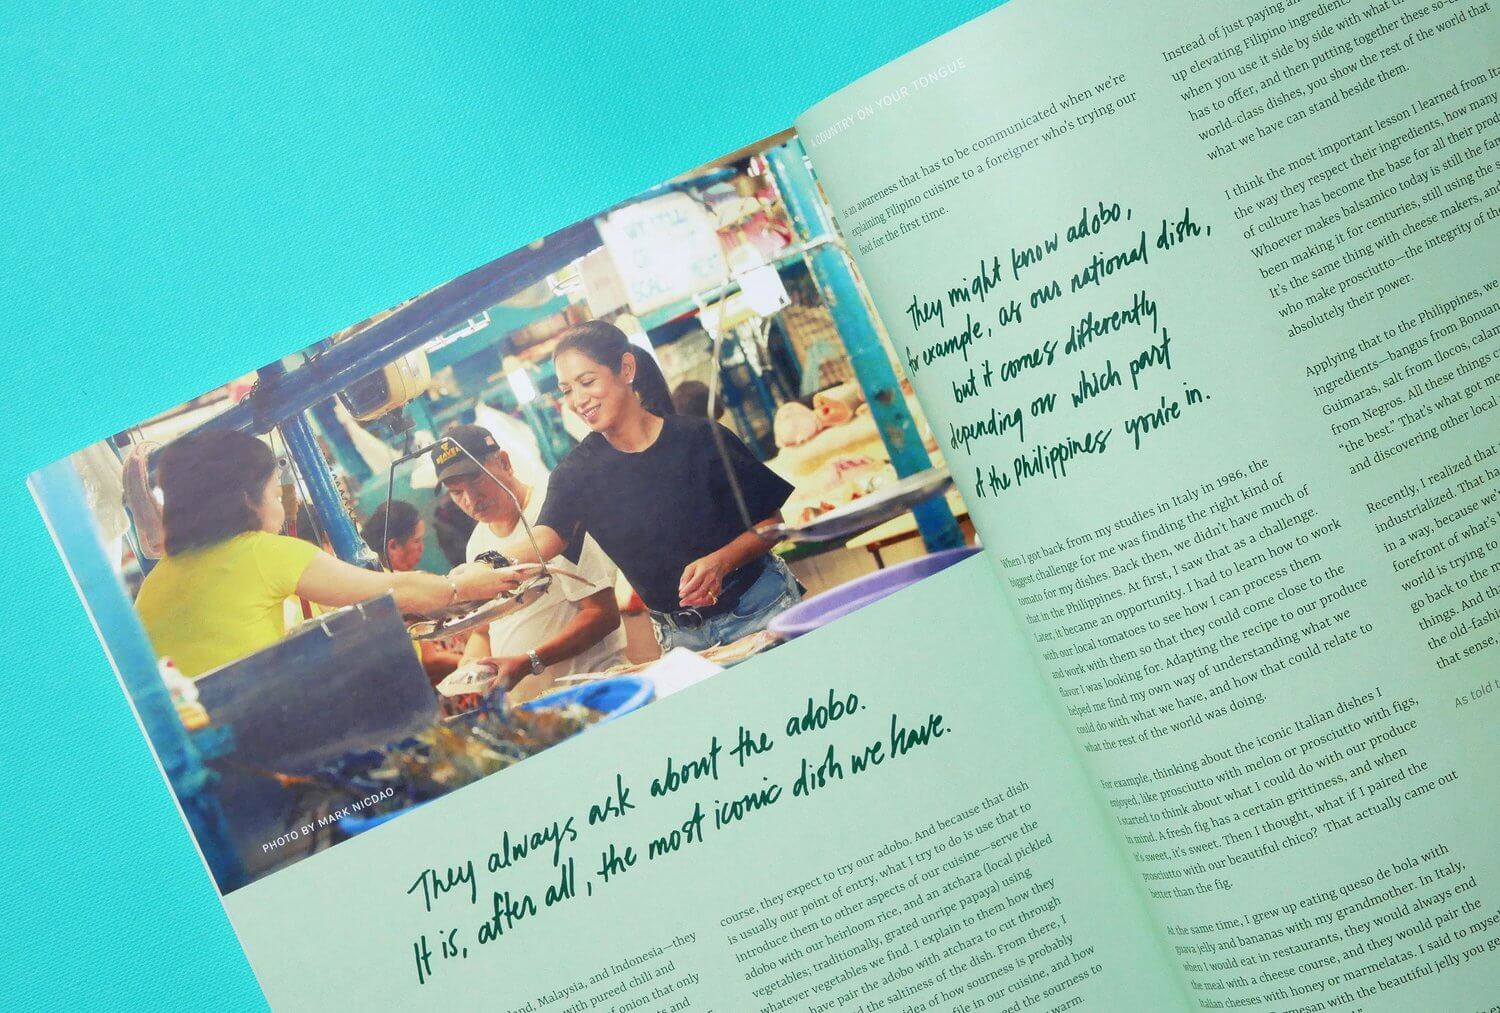 Print layout spread design featuring chef Margarita Flores on travel guide book Manila Manila and More